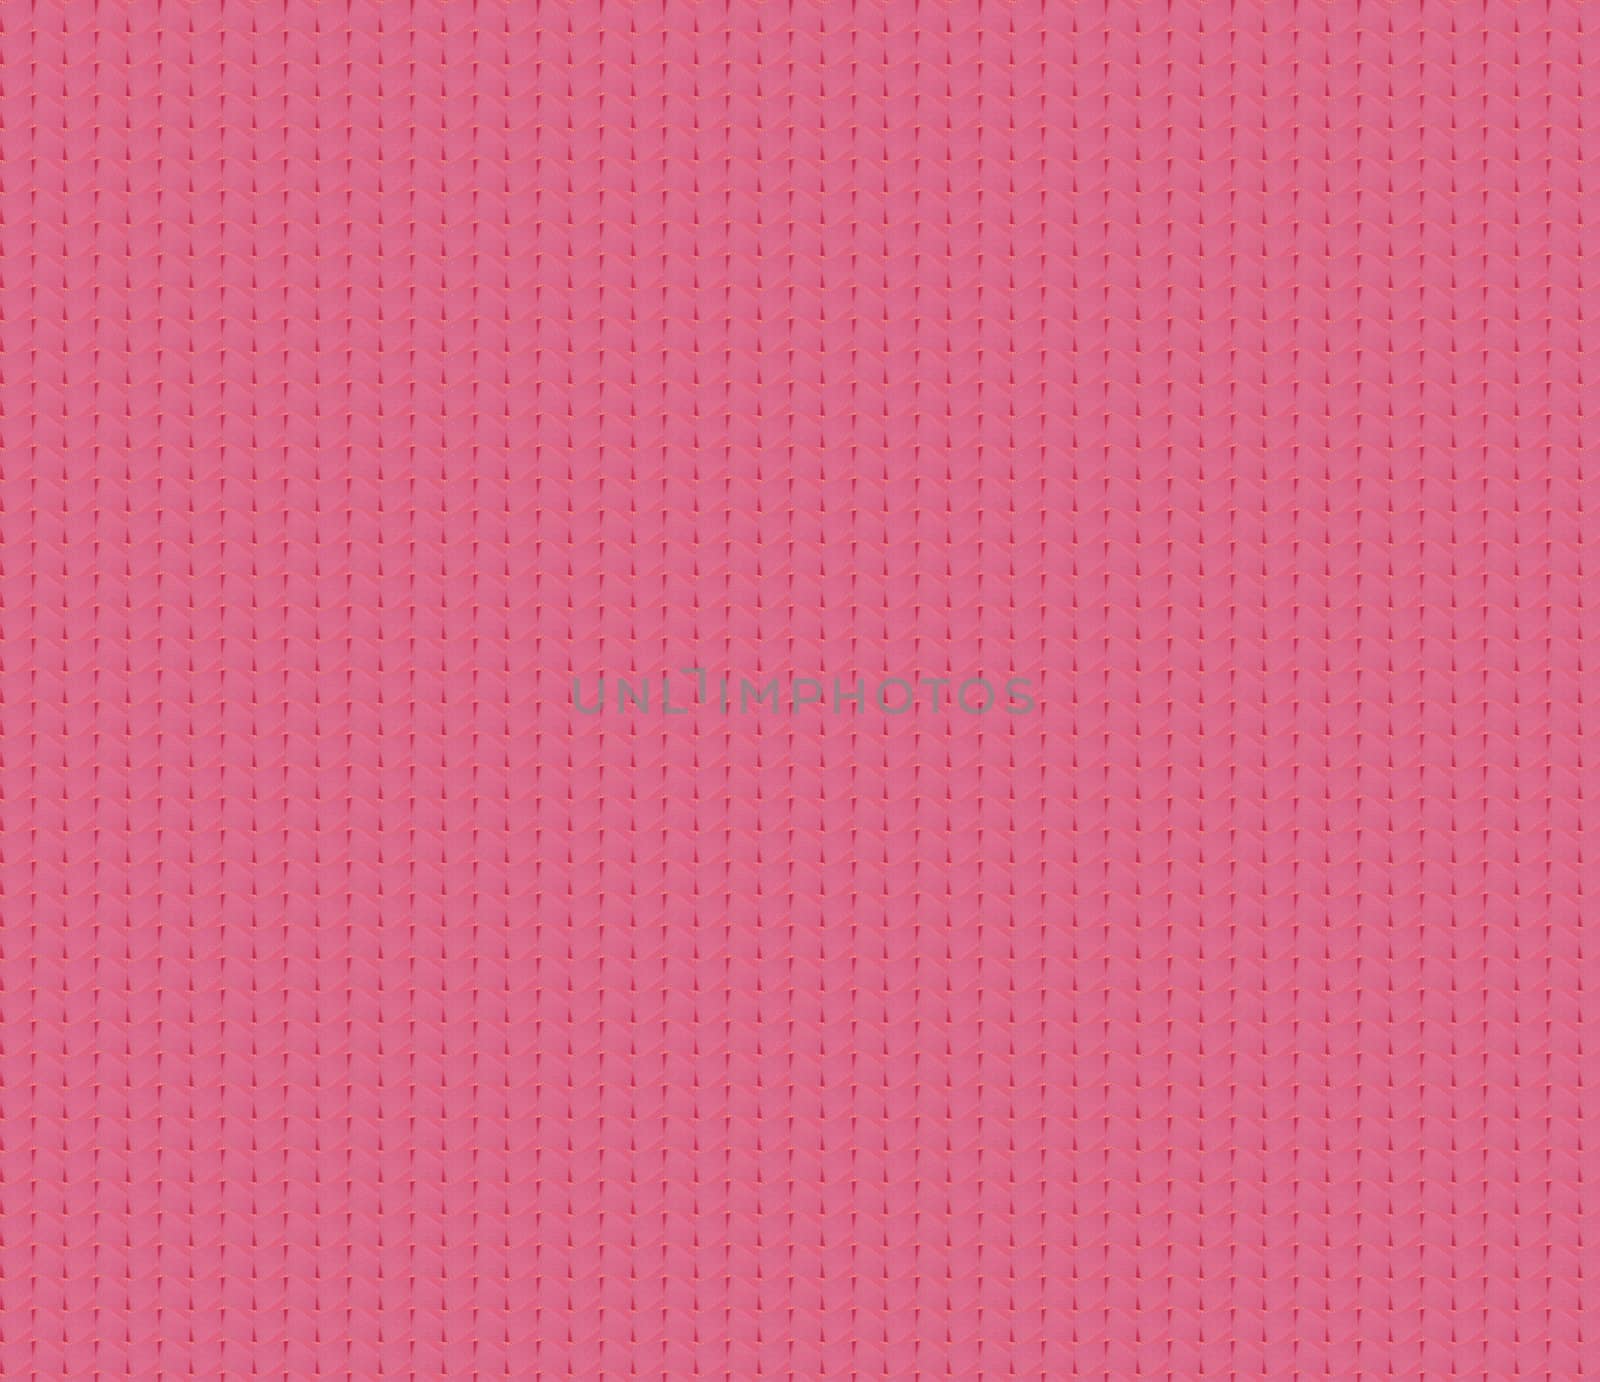 Abstract pink background by Krakatuk